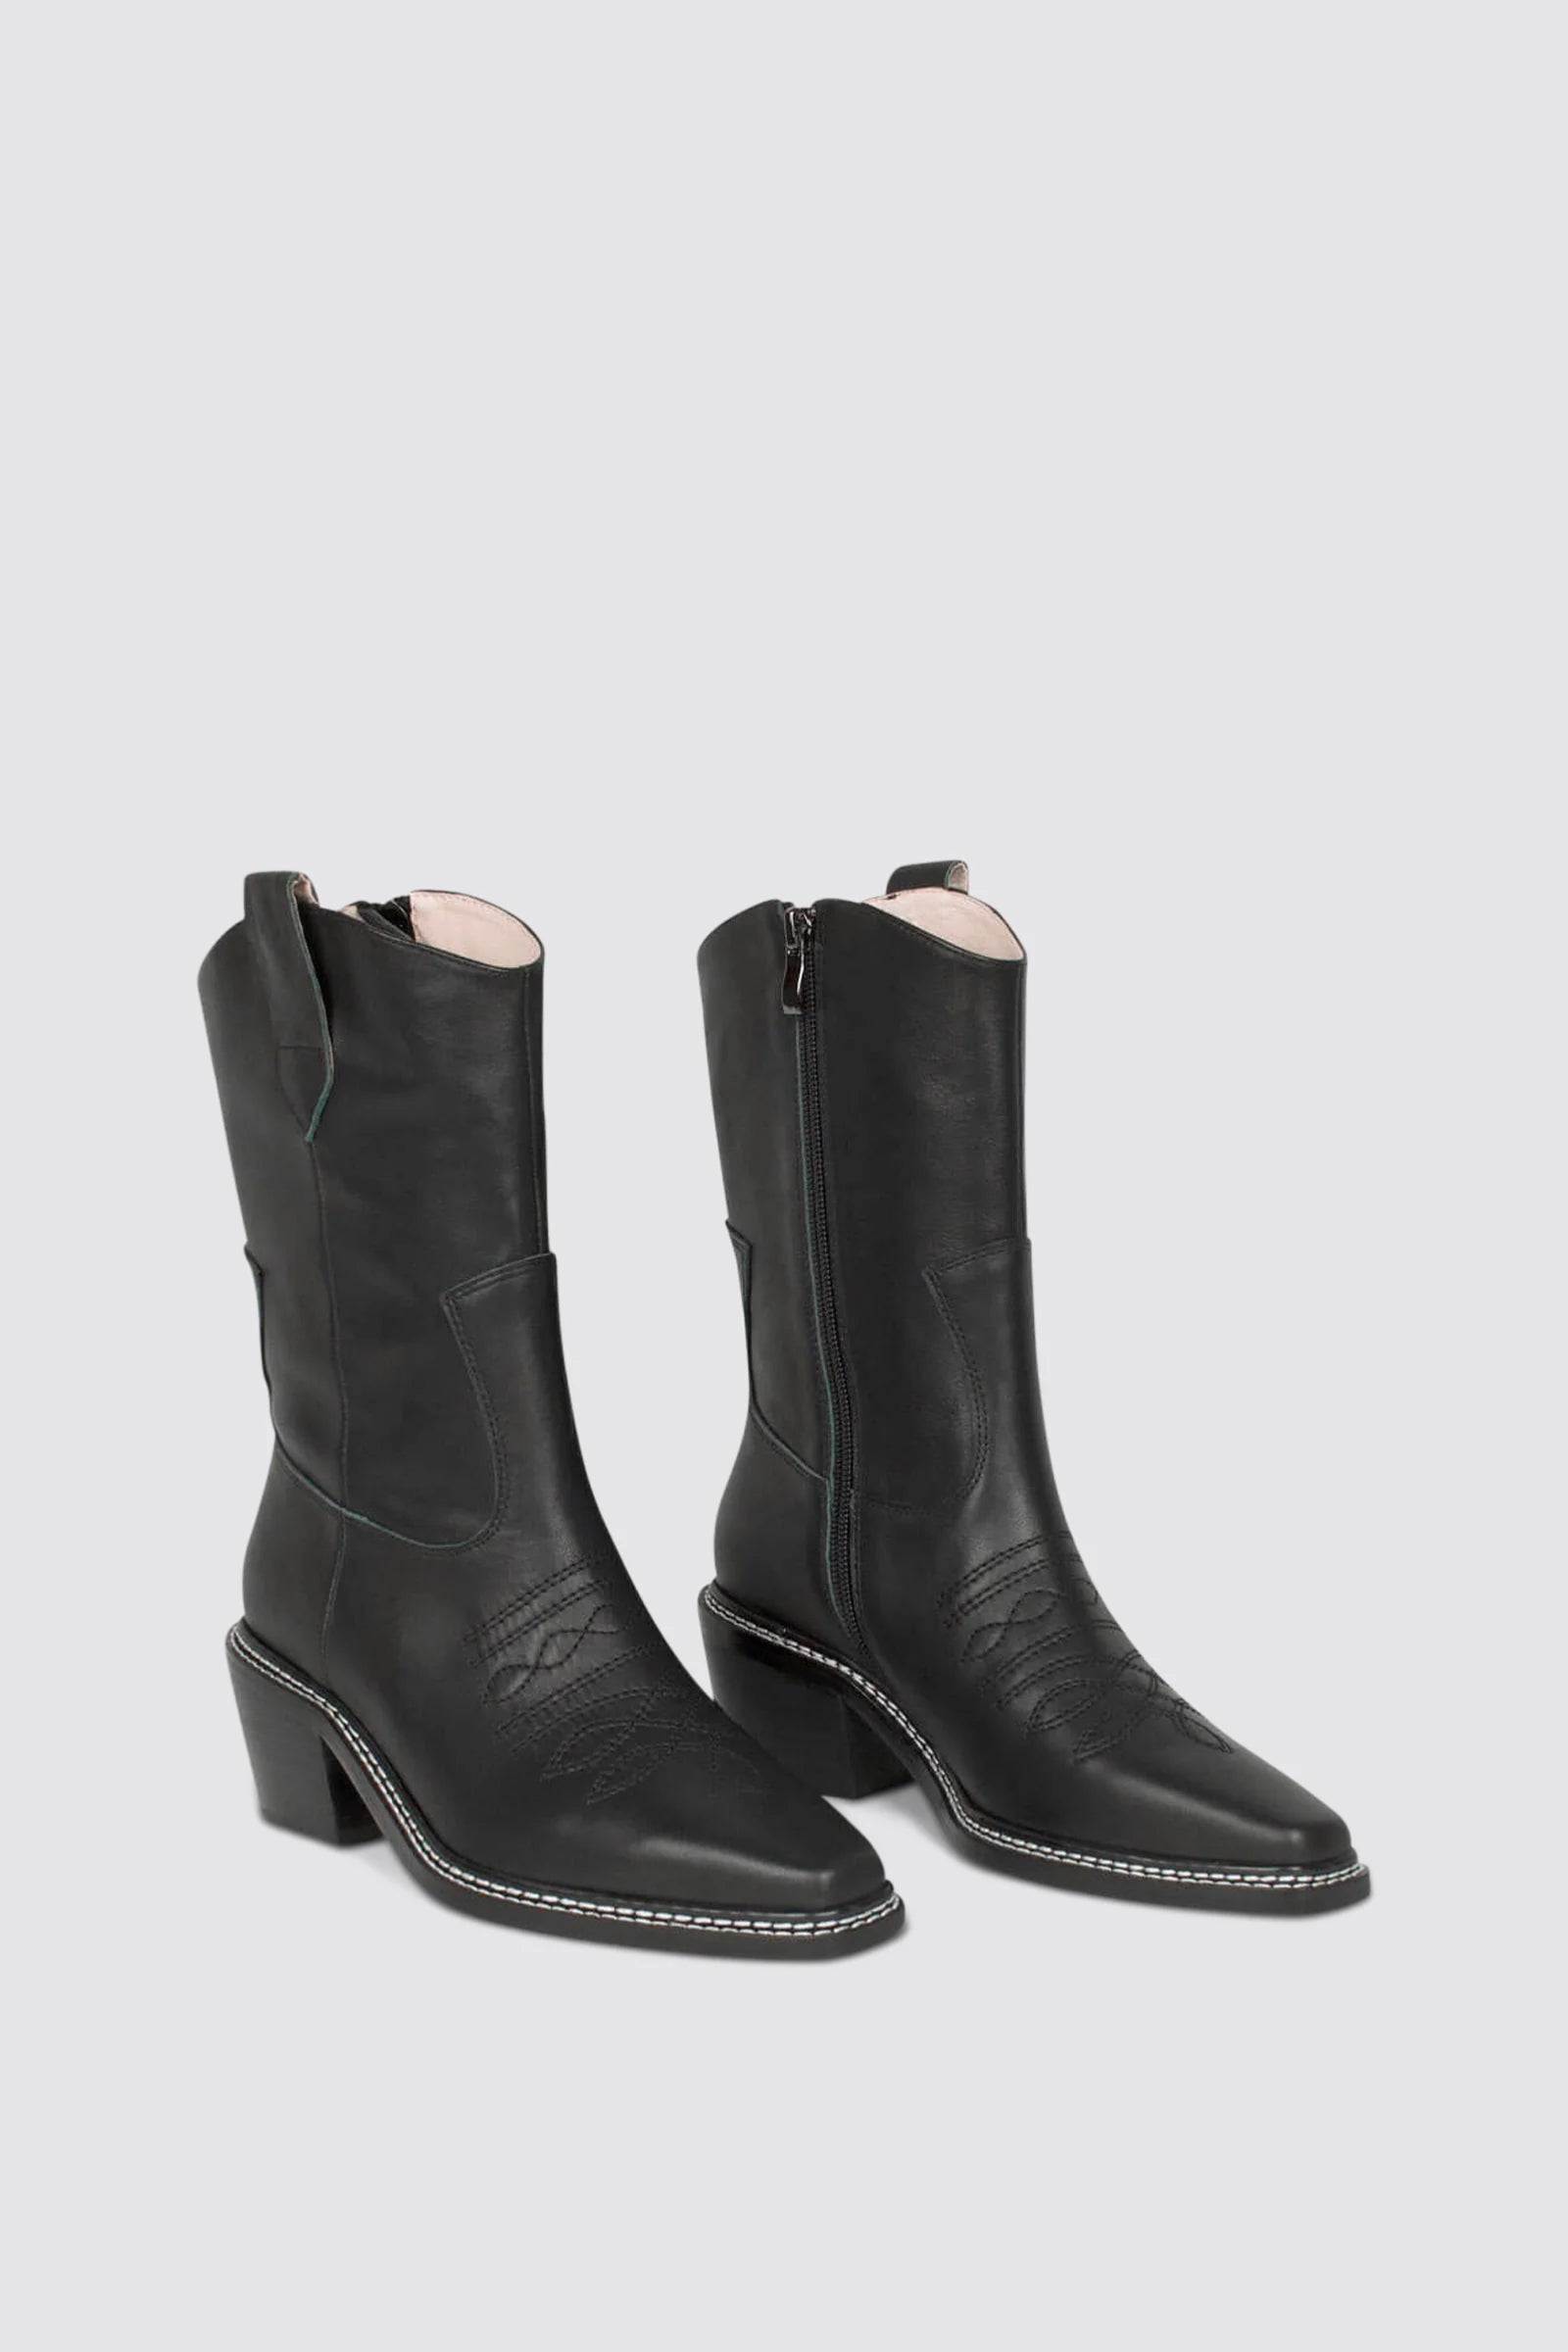 FEVER BOOT BLACK LEATHER